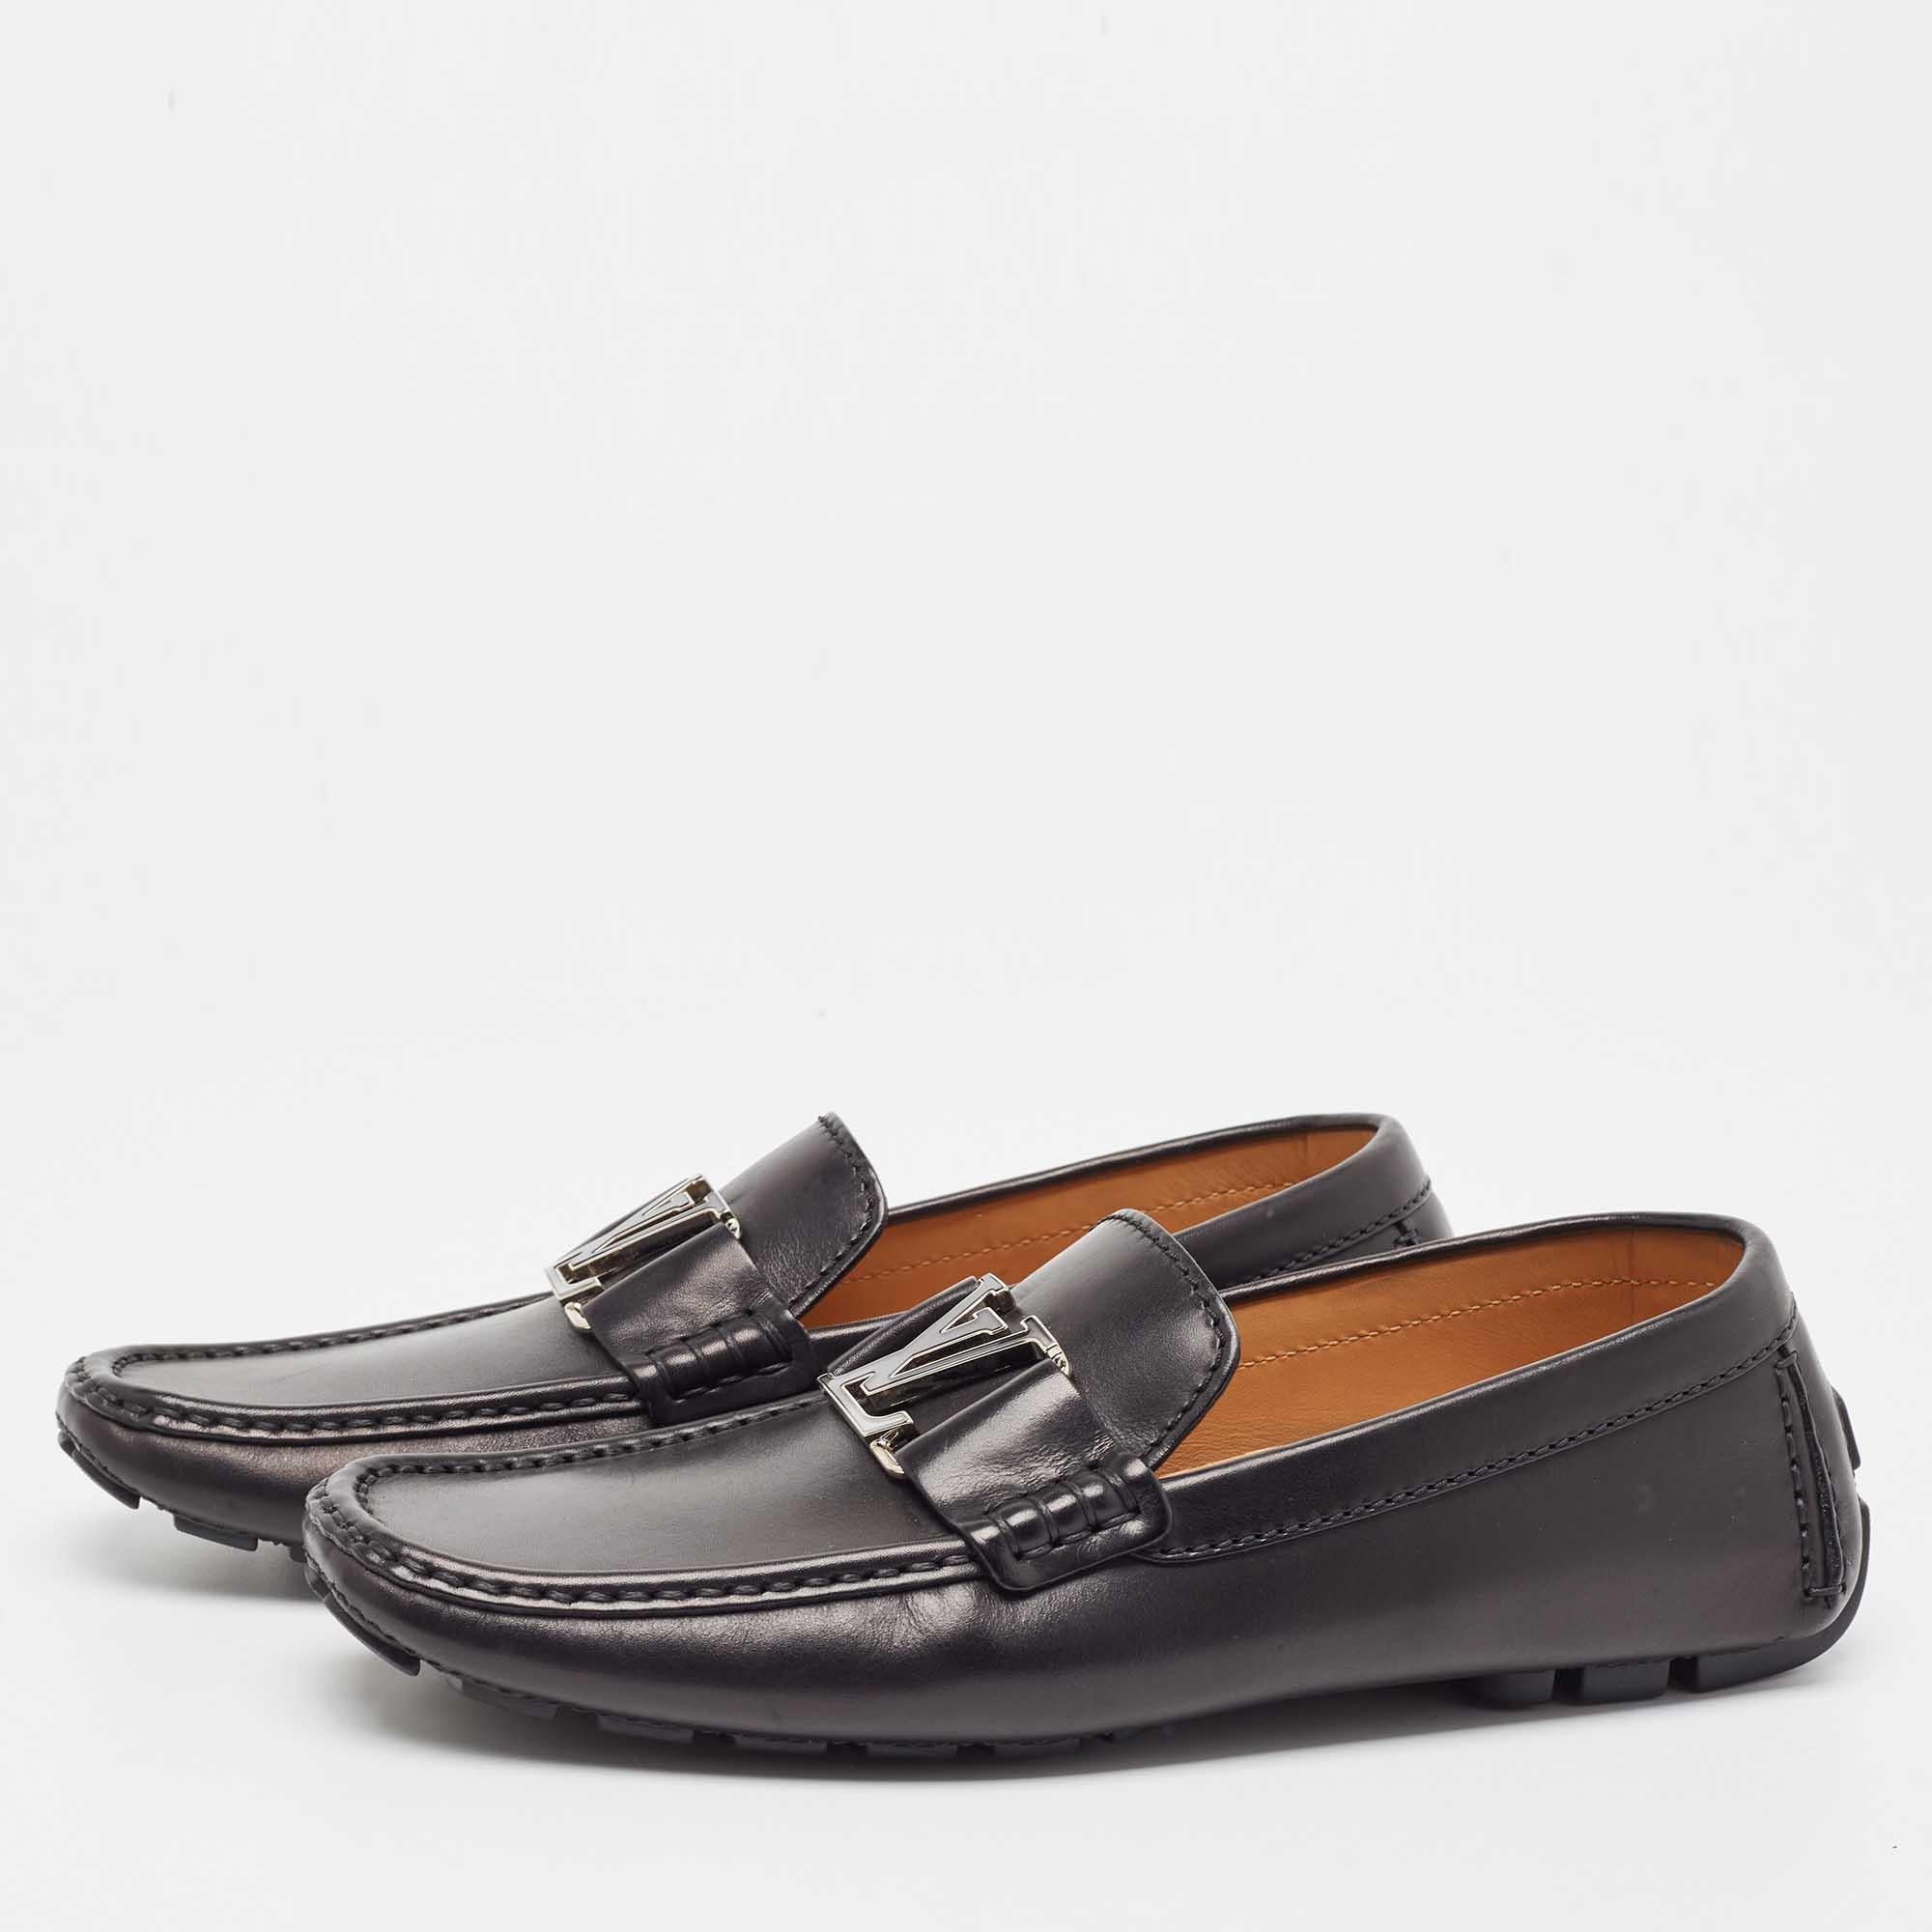 To perfectly complement your attires, we bring you this pair of Louis Vuitton loafers that speak nothing but style. The shoes have been crafted with skill and are designed to be easy to slip on. They are just the right choice to complement your